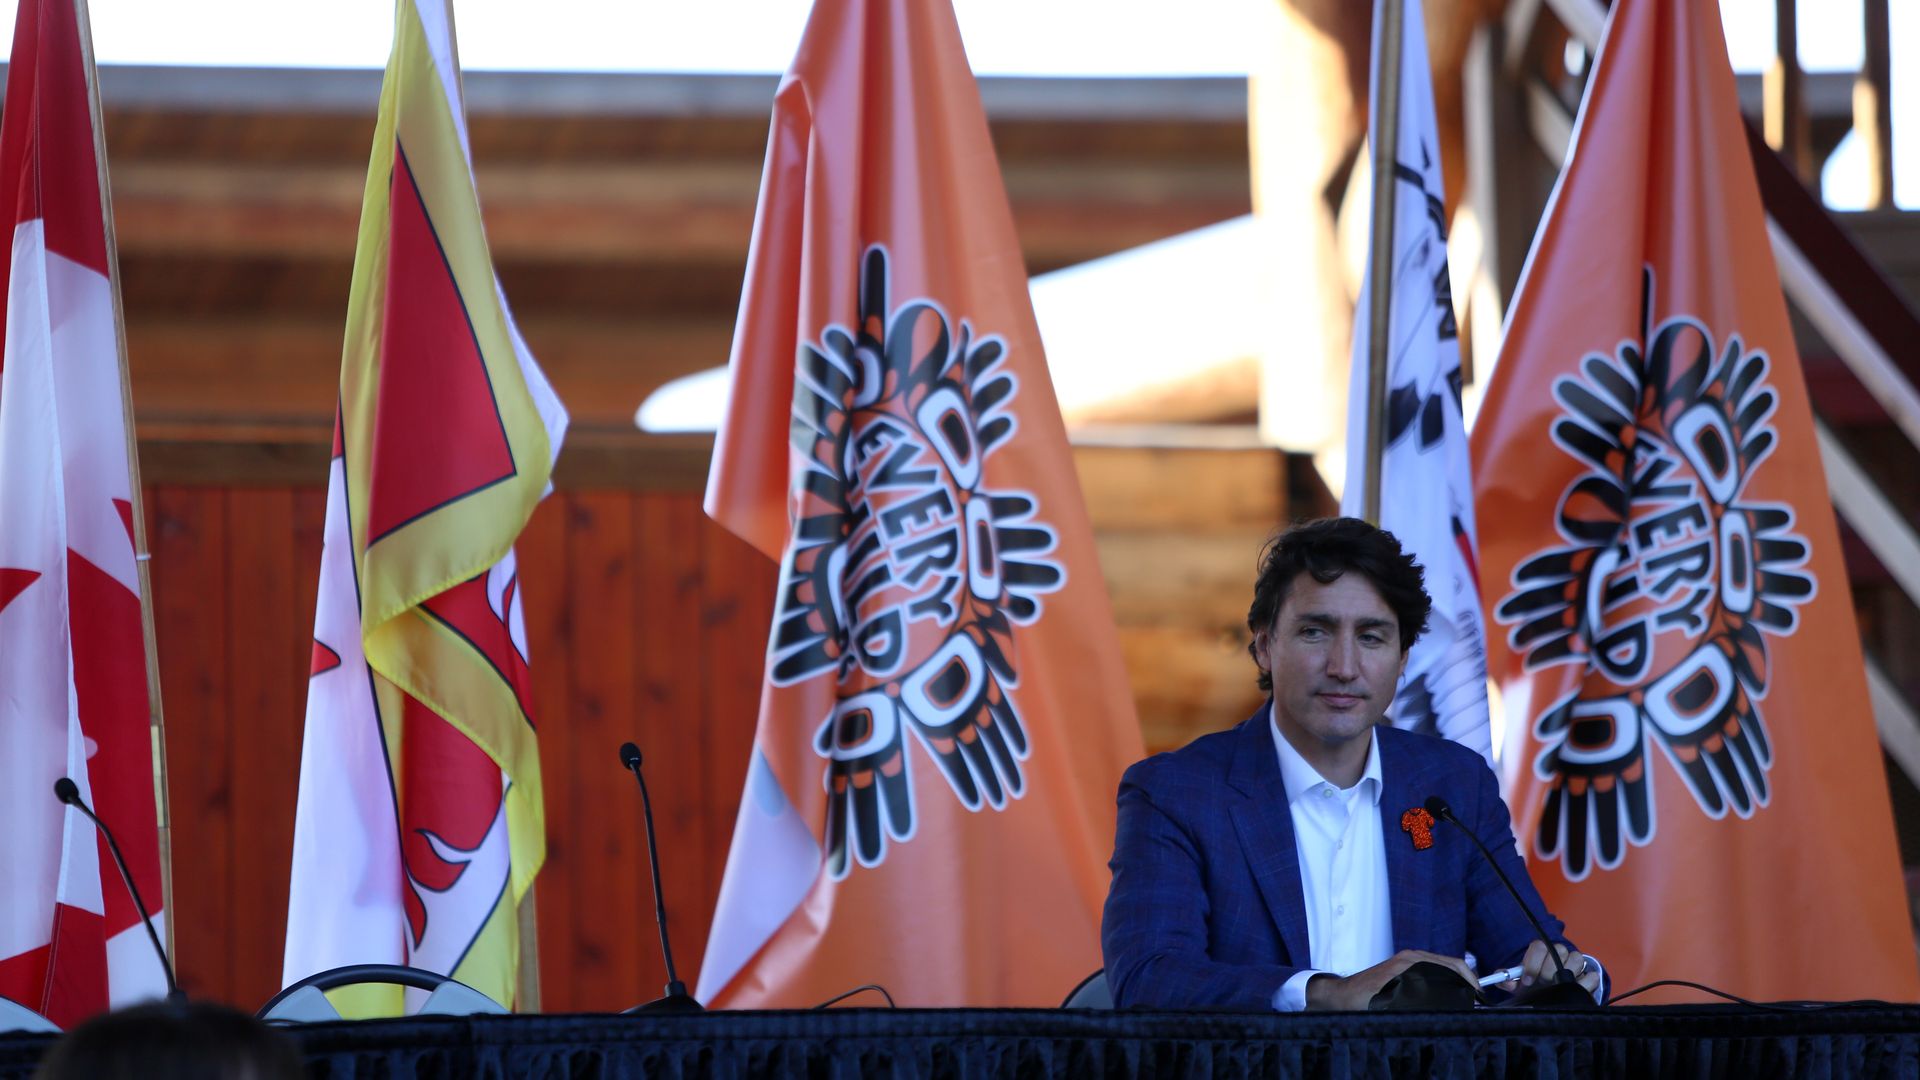 Photo of Justin Trudeau sitting with flags that say "Every Child Matters" standing behind him